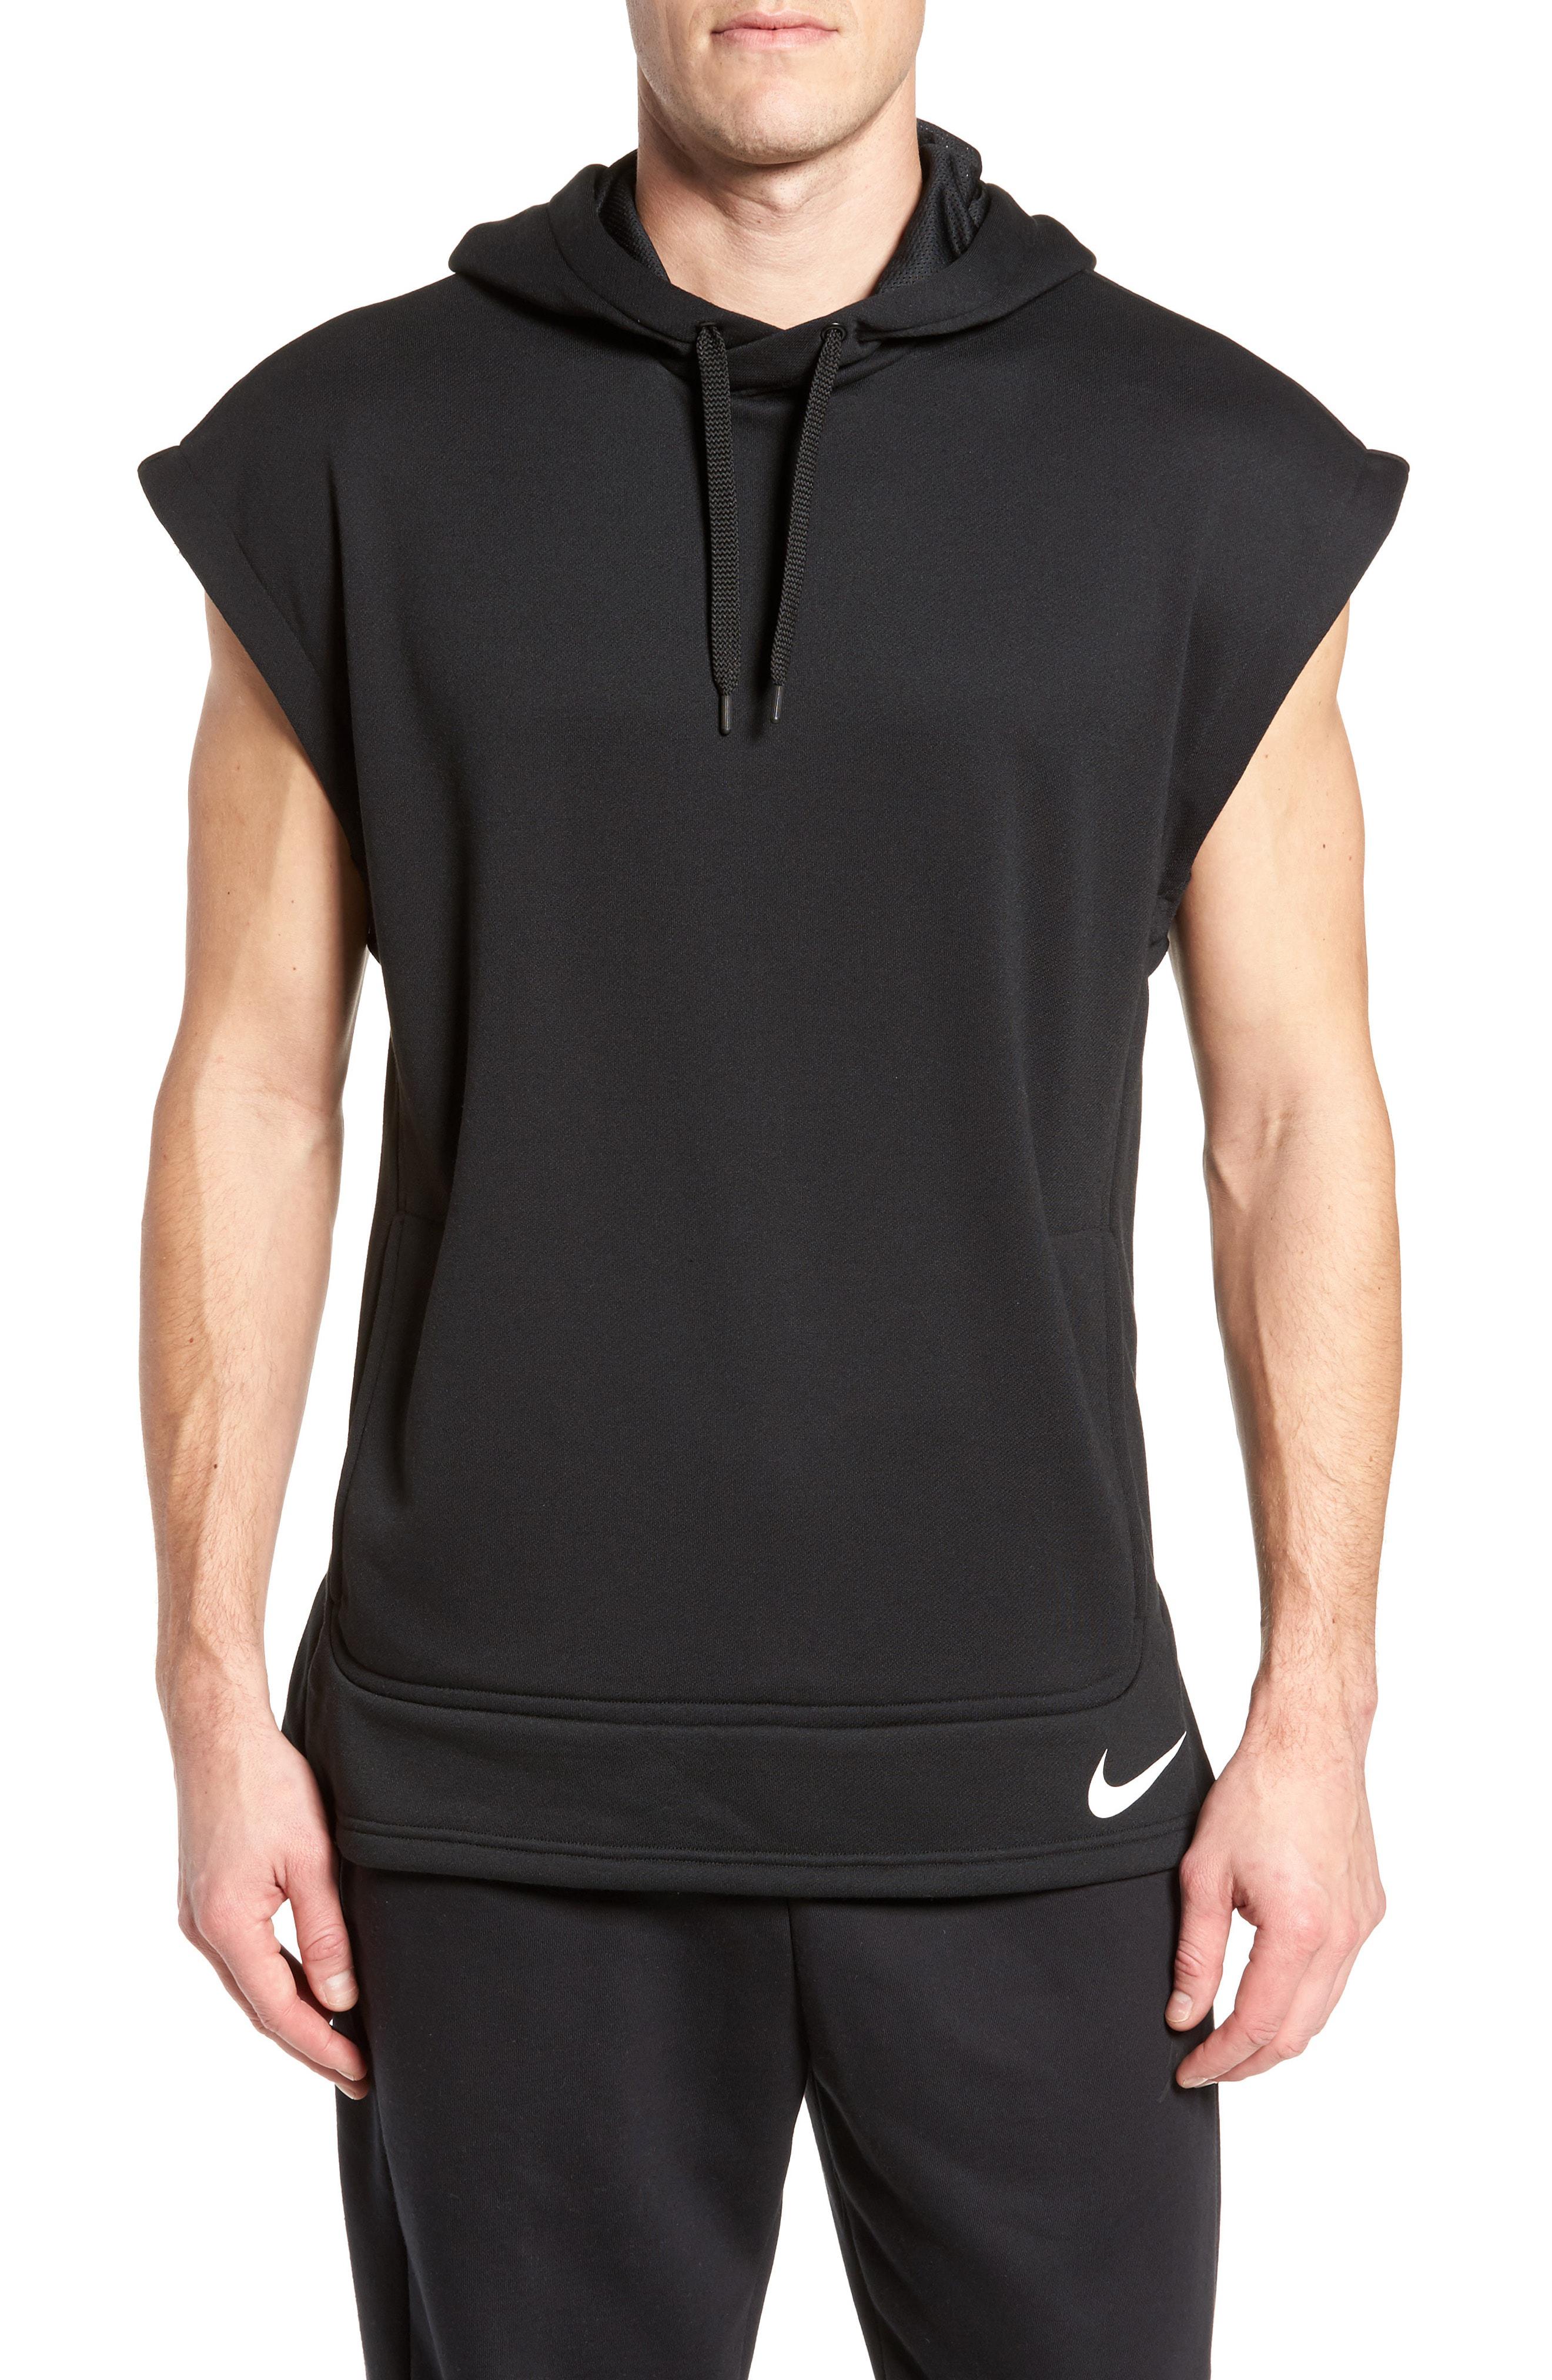 Nike Synthetic Dry Sleeveless Hoodie in Black for Men - Lyst